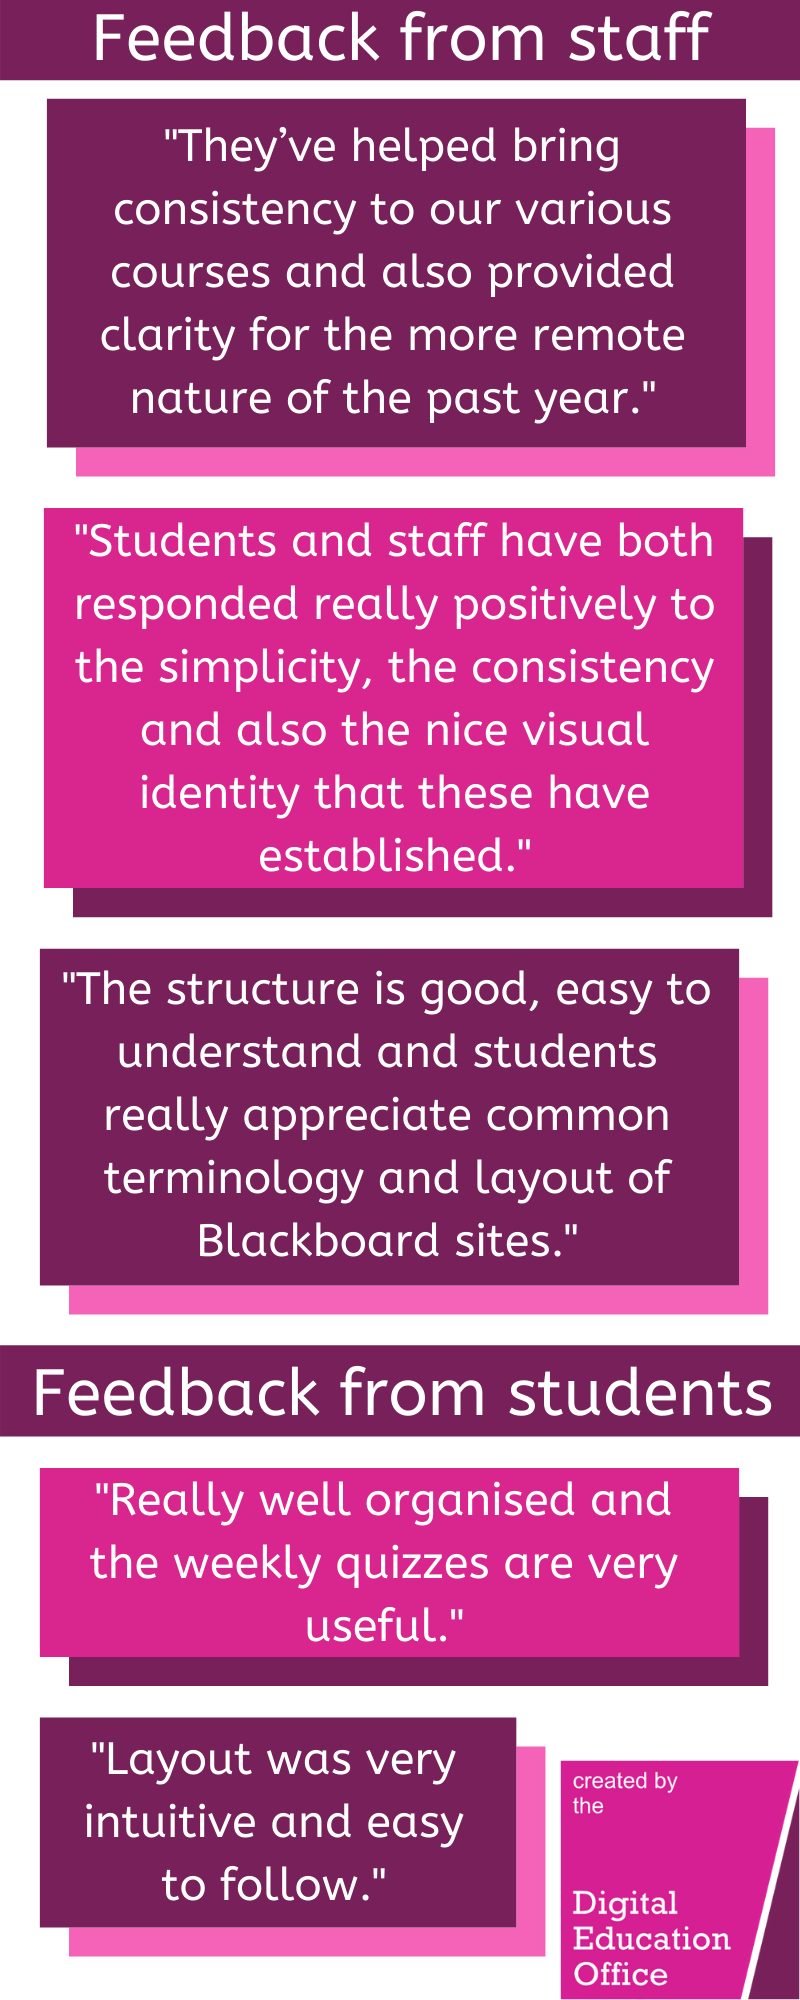 Feedback has been positive. From our staff: "They’ve helped bring consistency to our various courses and also provided clarity for the more remote nature of the past year.". From our students: "Really well organised and the weekly quizzes are very useful.", "Layout was very intuitive and easy to follow." Click to find out more.